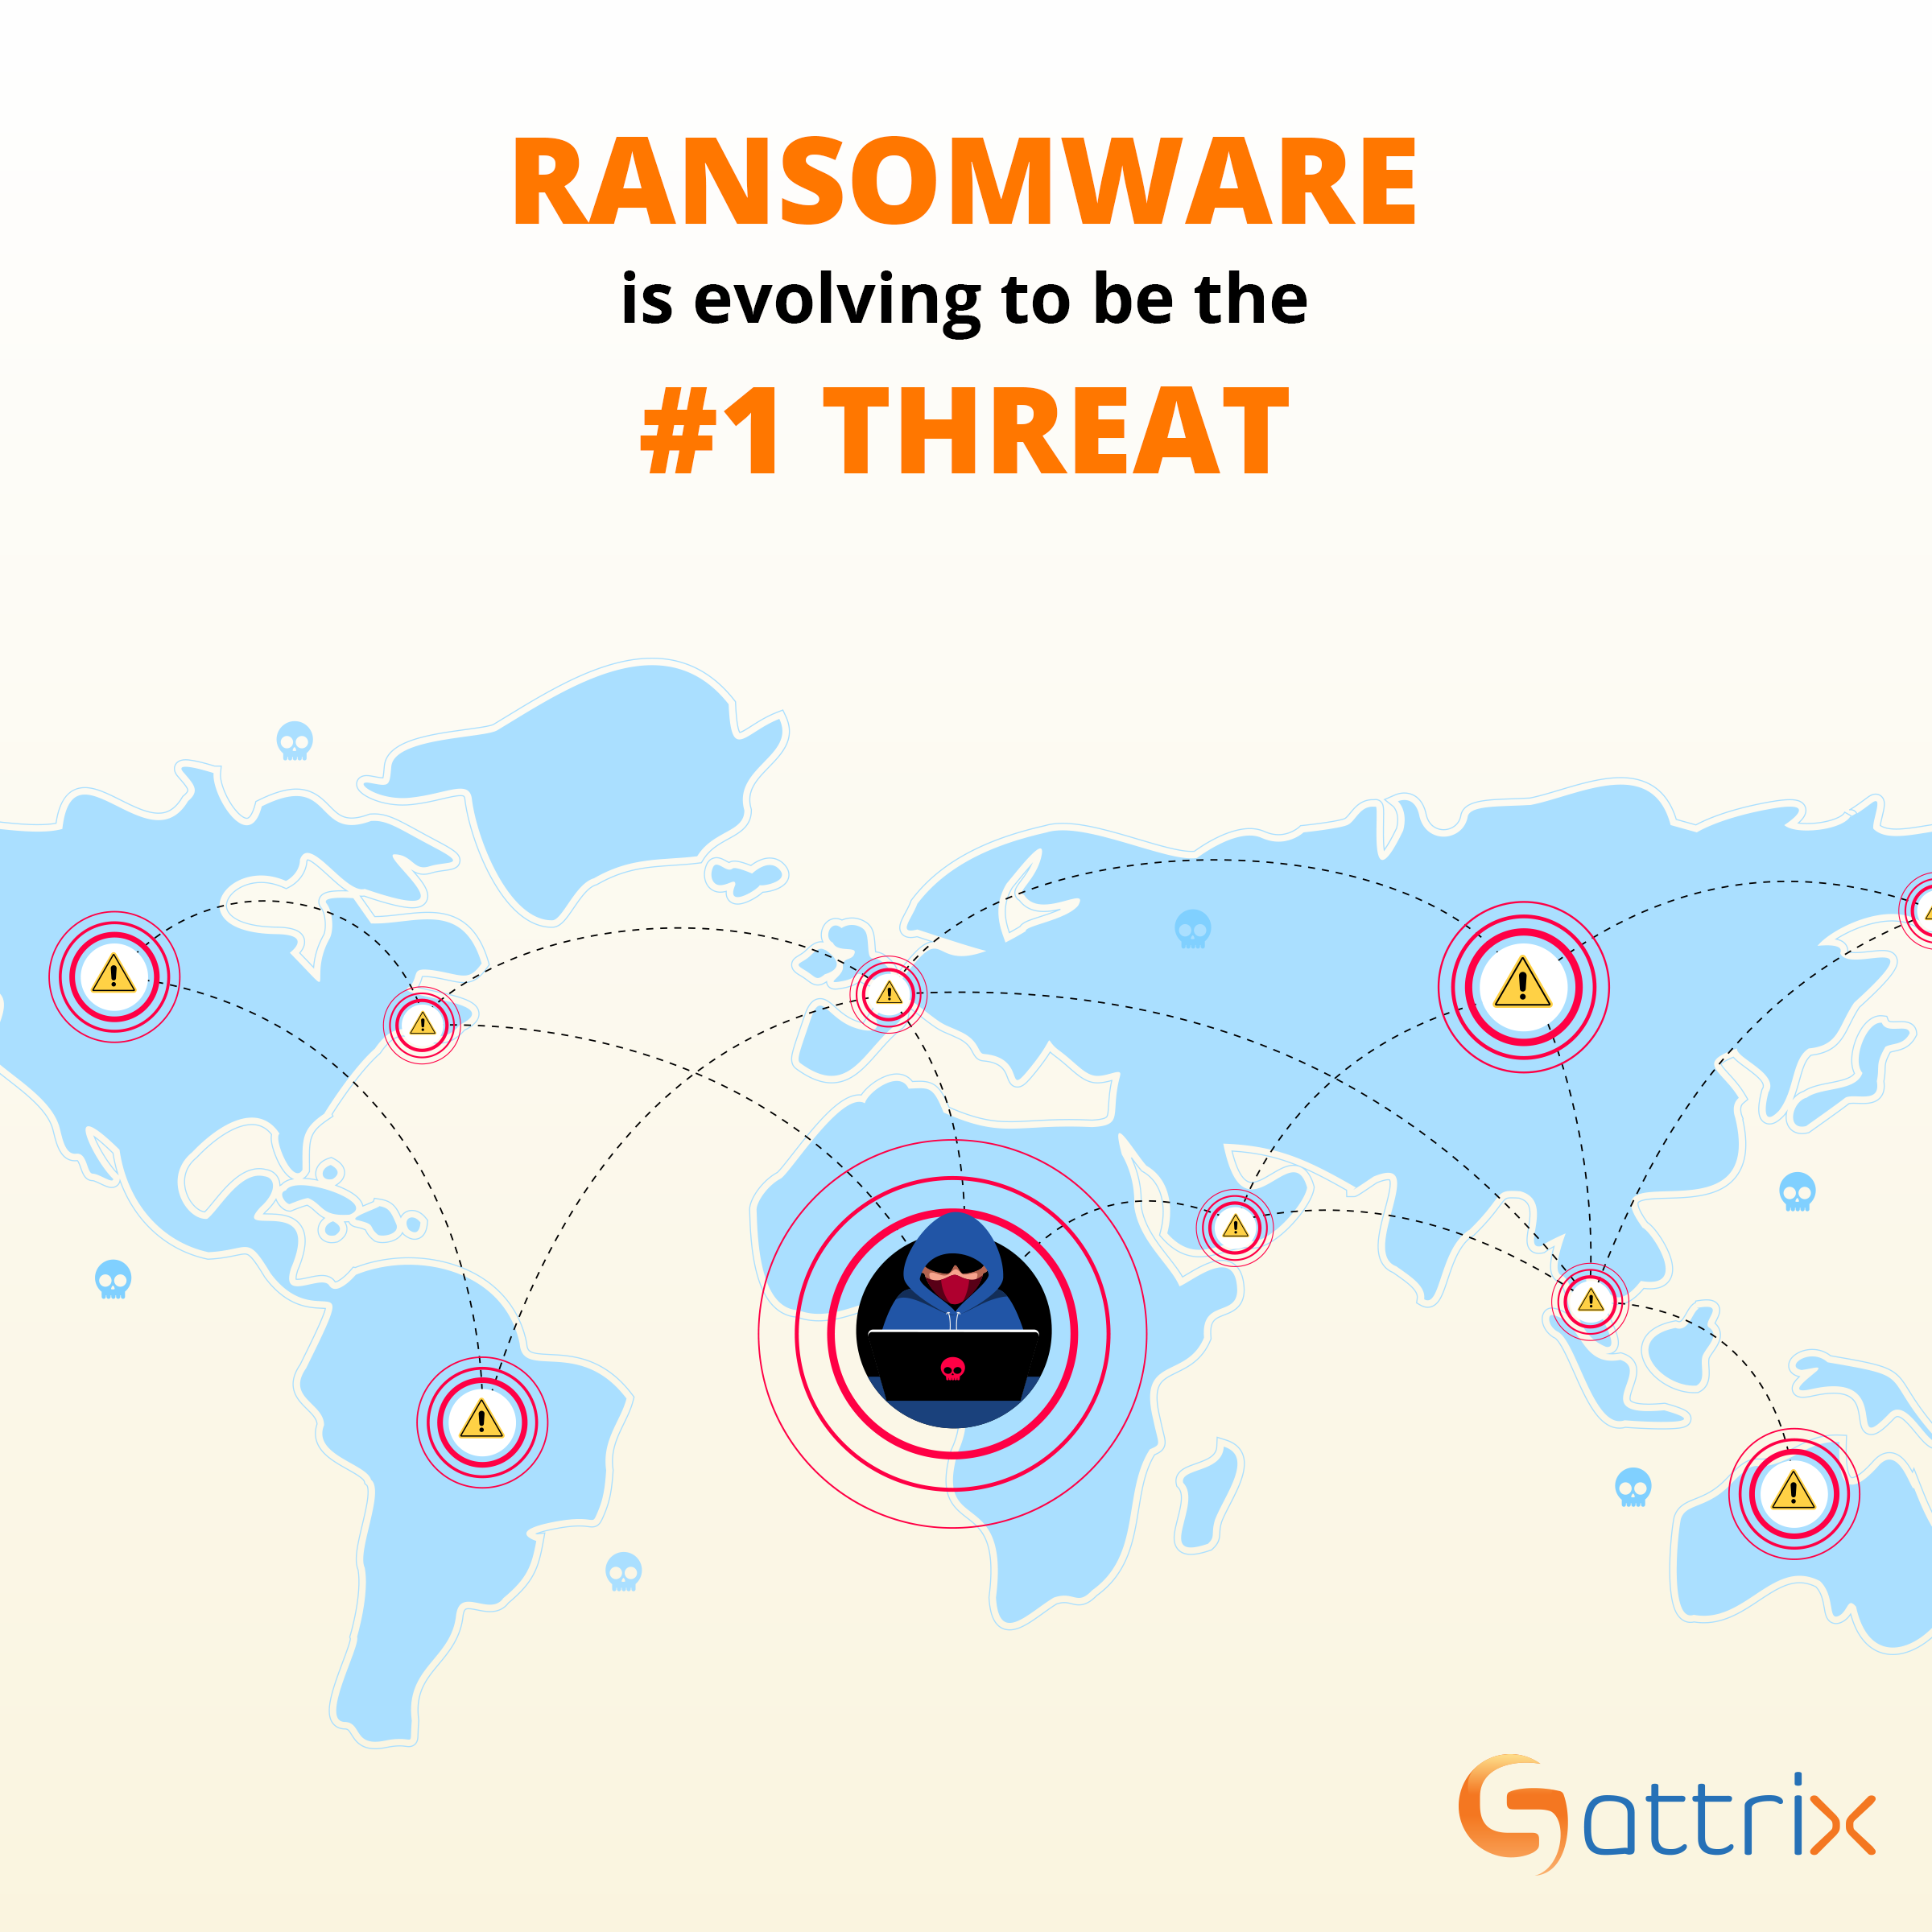 Ransomware is evolving to be the #1 Threat